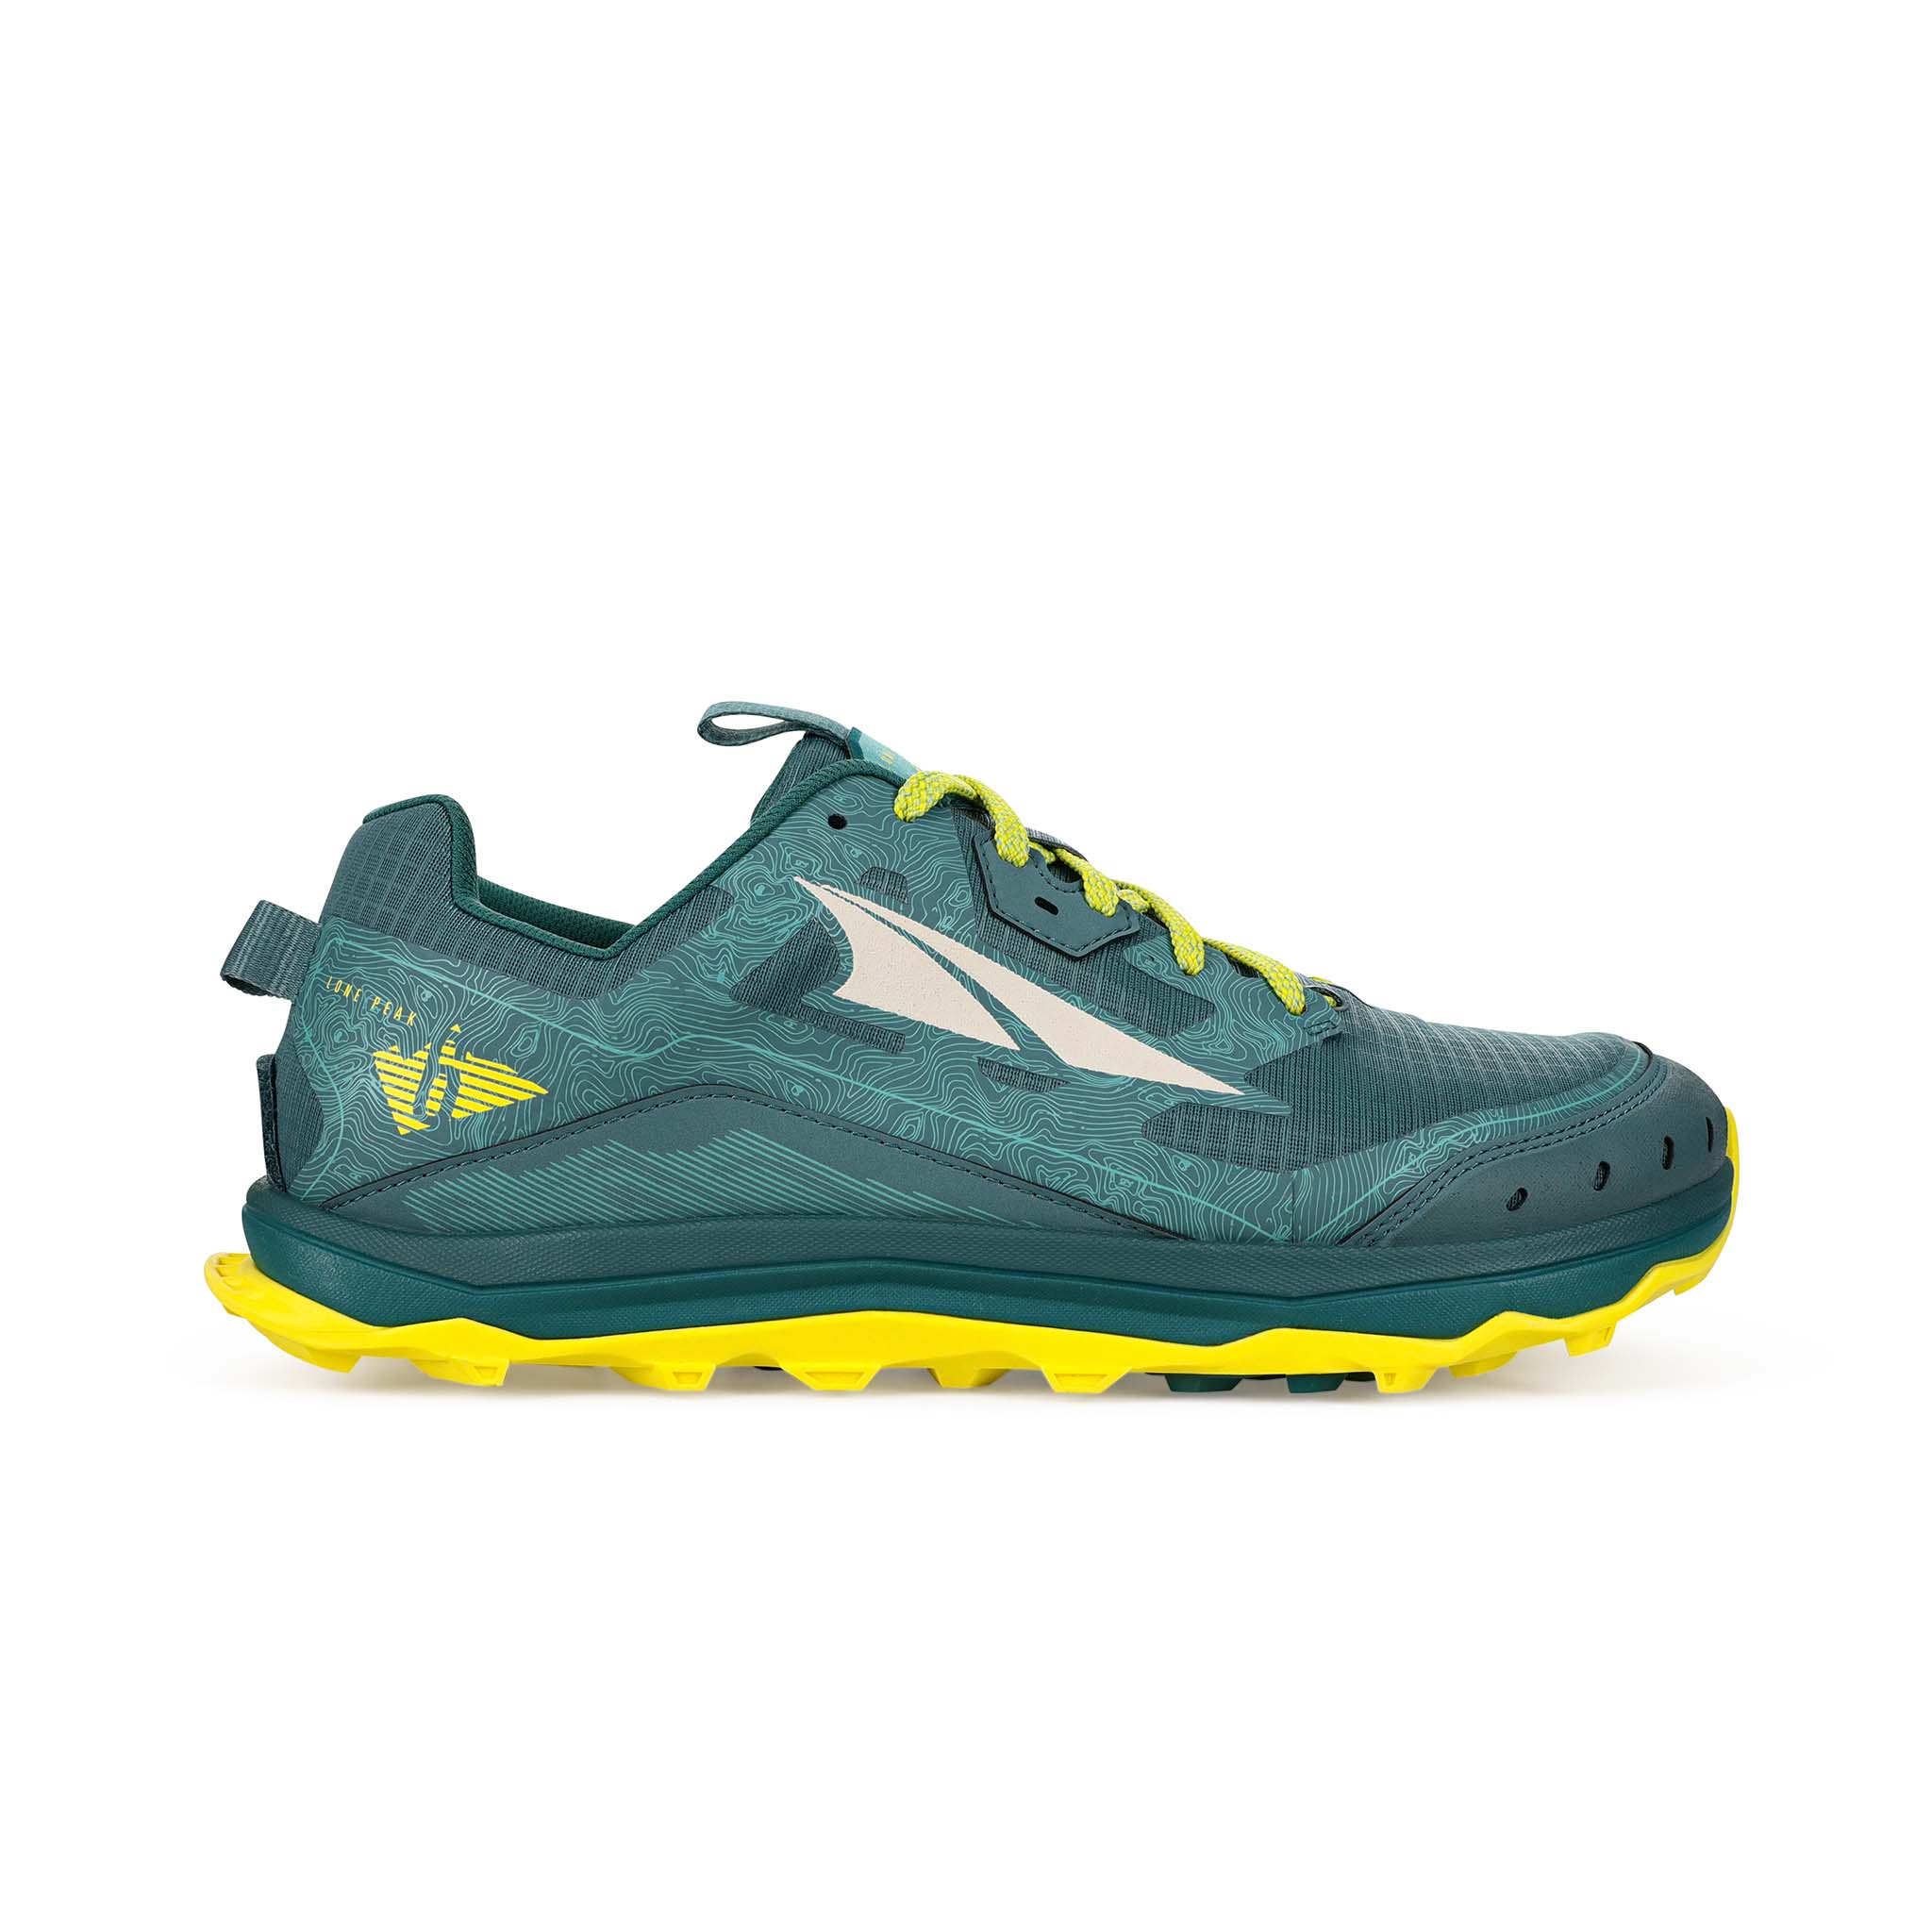 Altra | Men's Lone Peak 6 Running Shoes - Dusty Teal